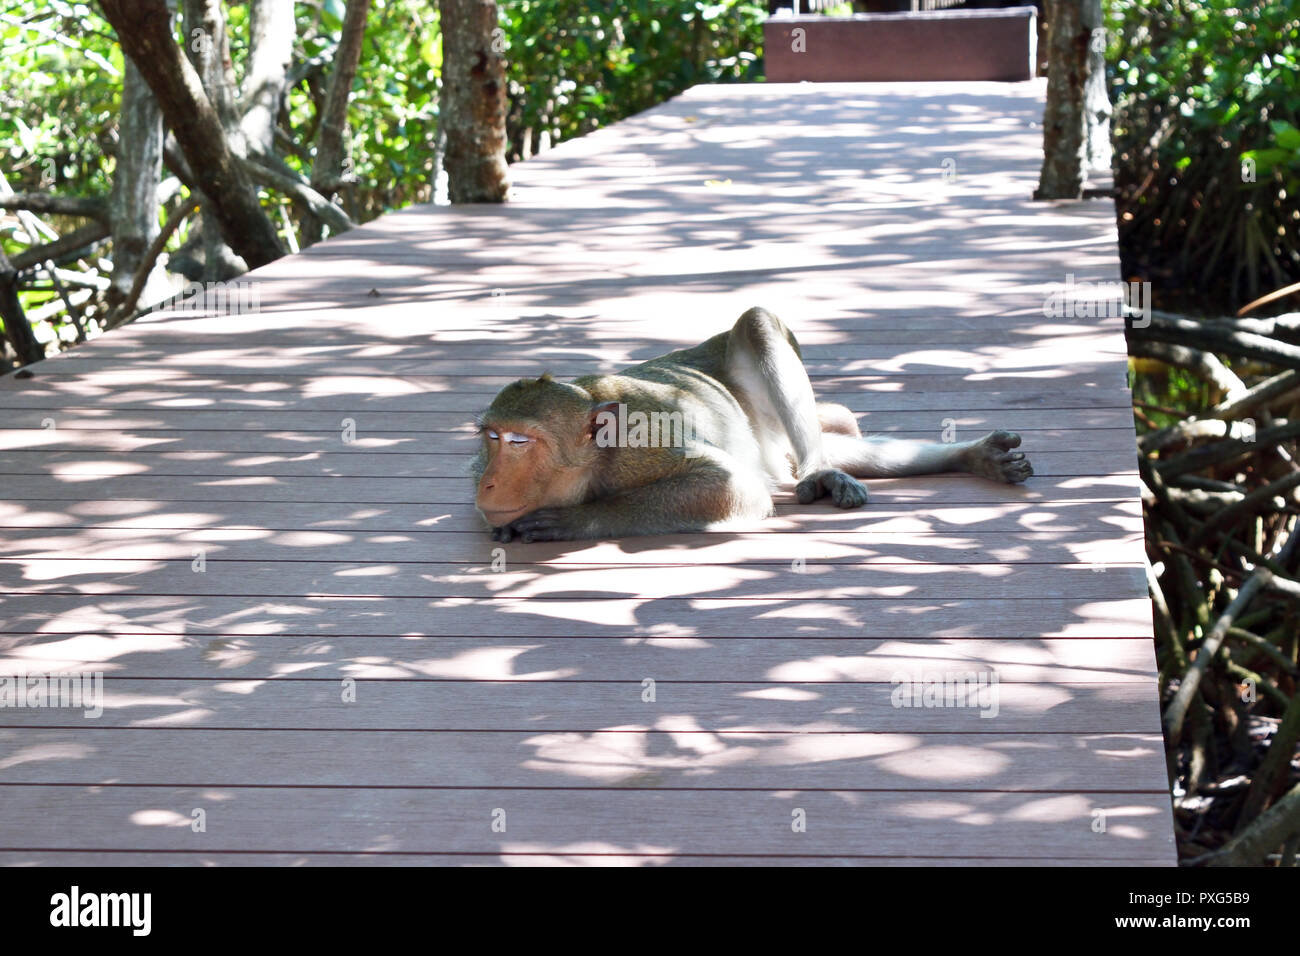 Golden hairy monkey sleeping on wooden bridge in mangrove forest, Long-tailed macaque, Crab-eating macaque at Khao Sam Roi Yot National Park, Thailand Stock Photo